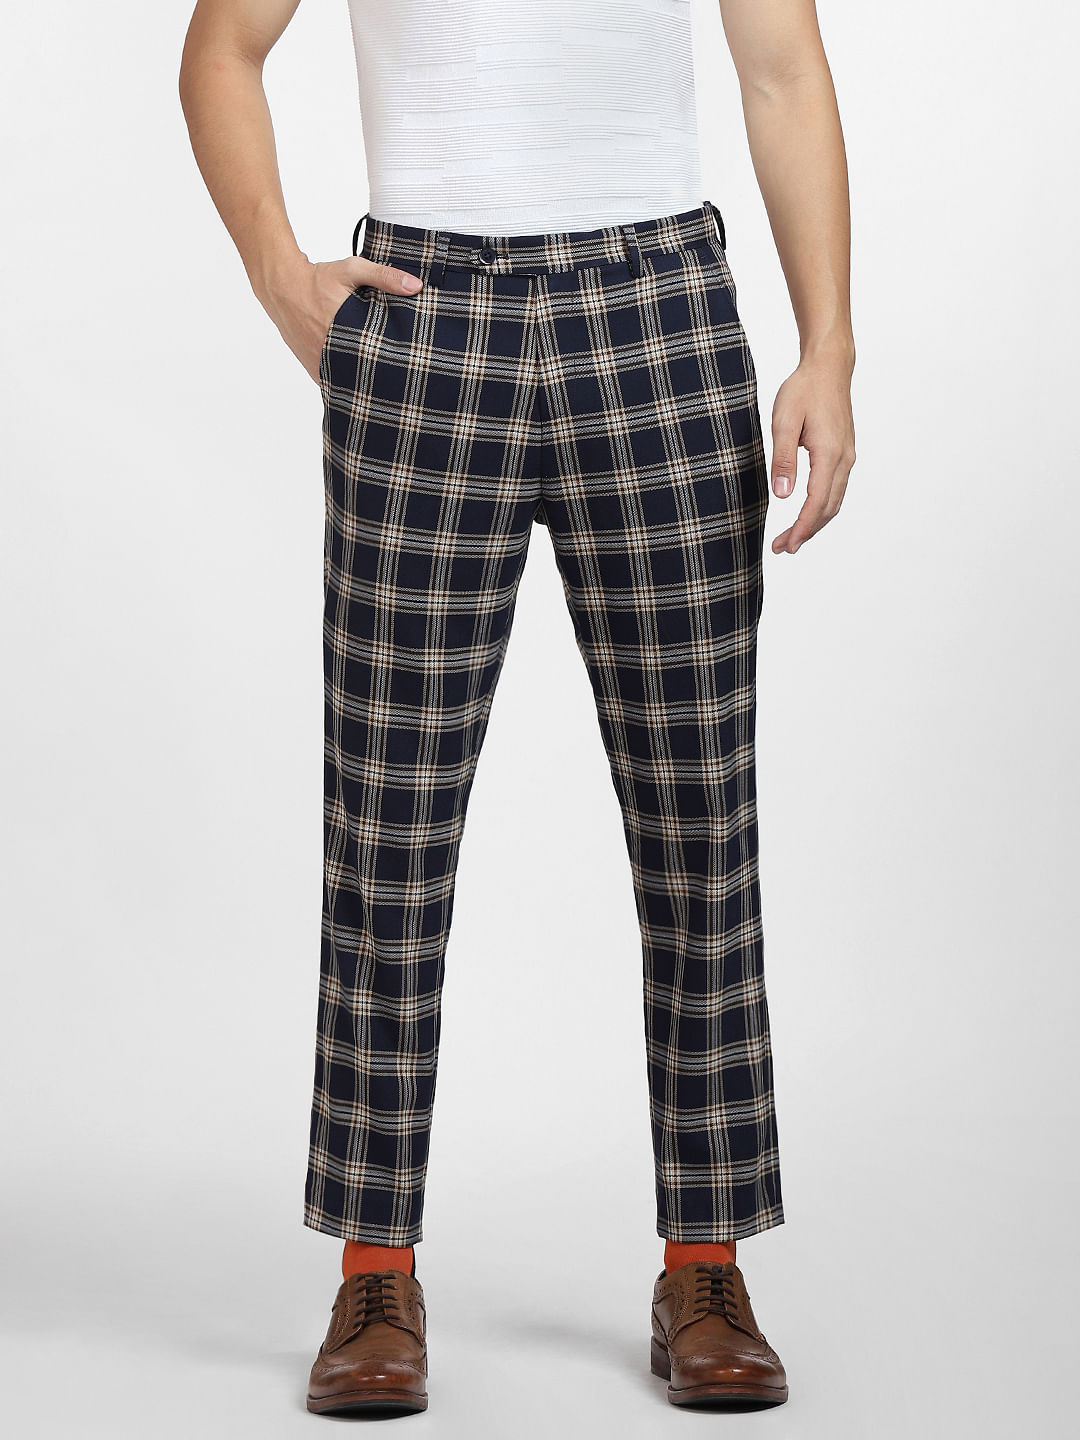 4 Fun Easy Ways You Can Style Checkered Pants - Mazciel